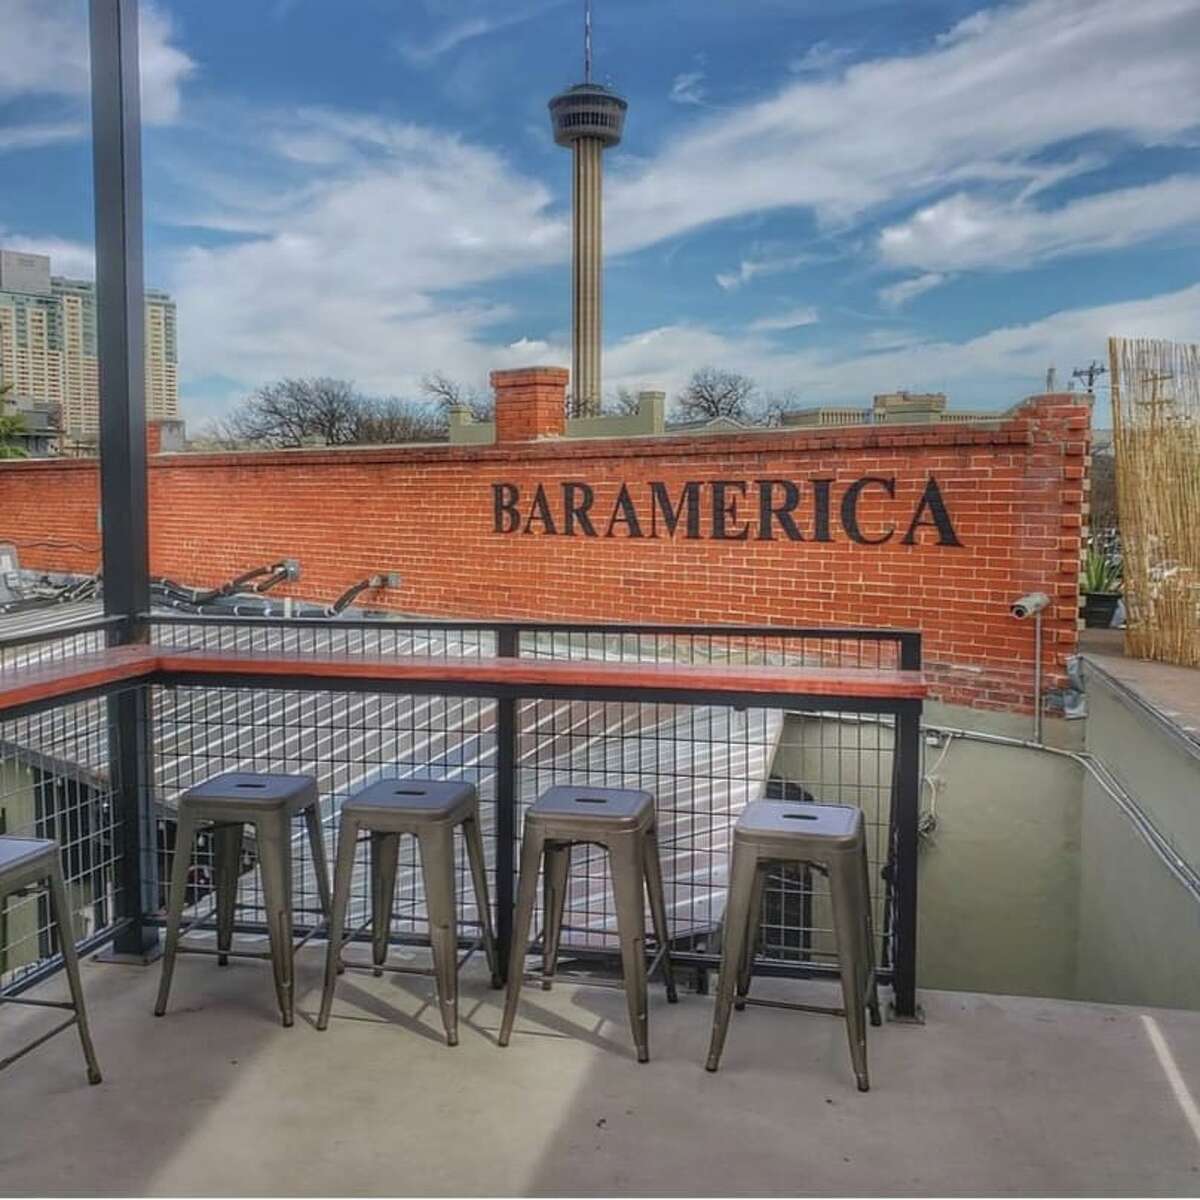 While the 77-year-old hangout is proud of incorporating elements that were around when the first drink was poured in 1942, like the neon "Bar America" sign that overlooks the dance floor, the space is now up-to-date with the city's growing mural scene and rooftop patio trend.